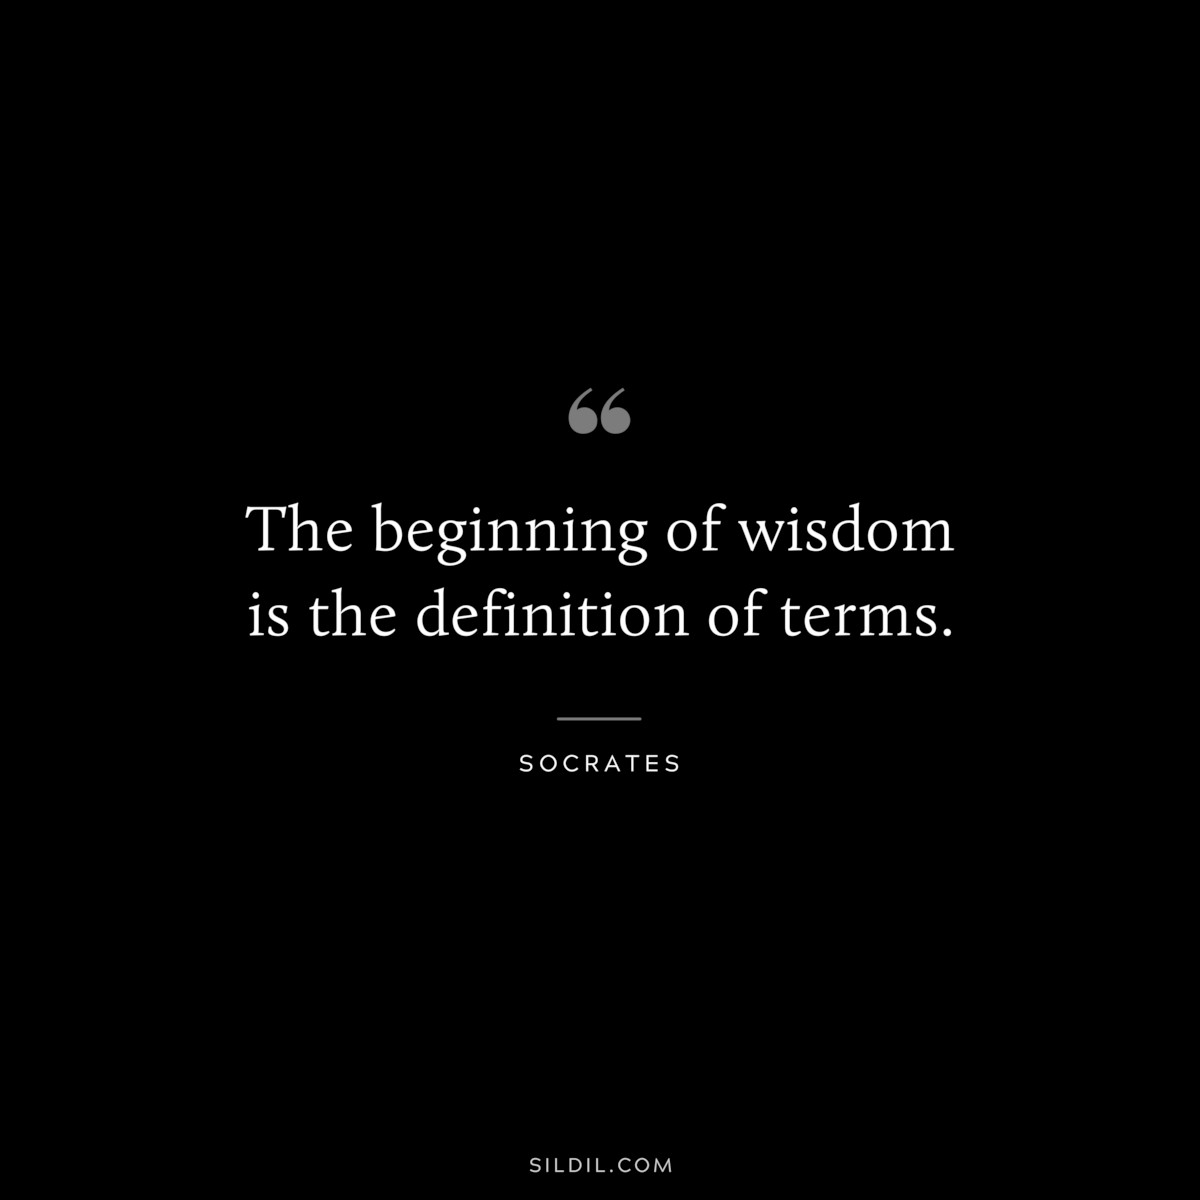 The beginning of wisdom is the definition of terms. ― Socrates